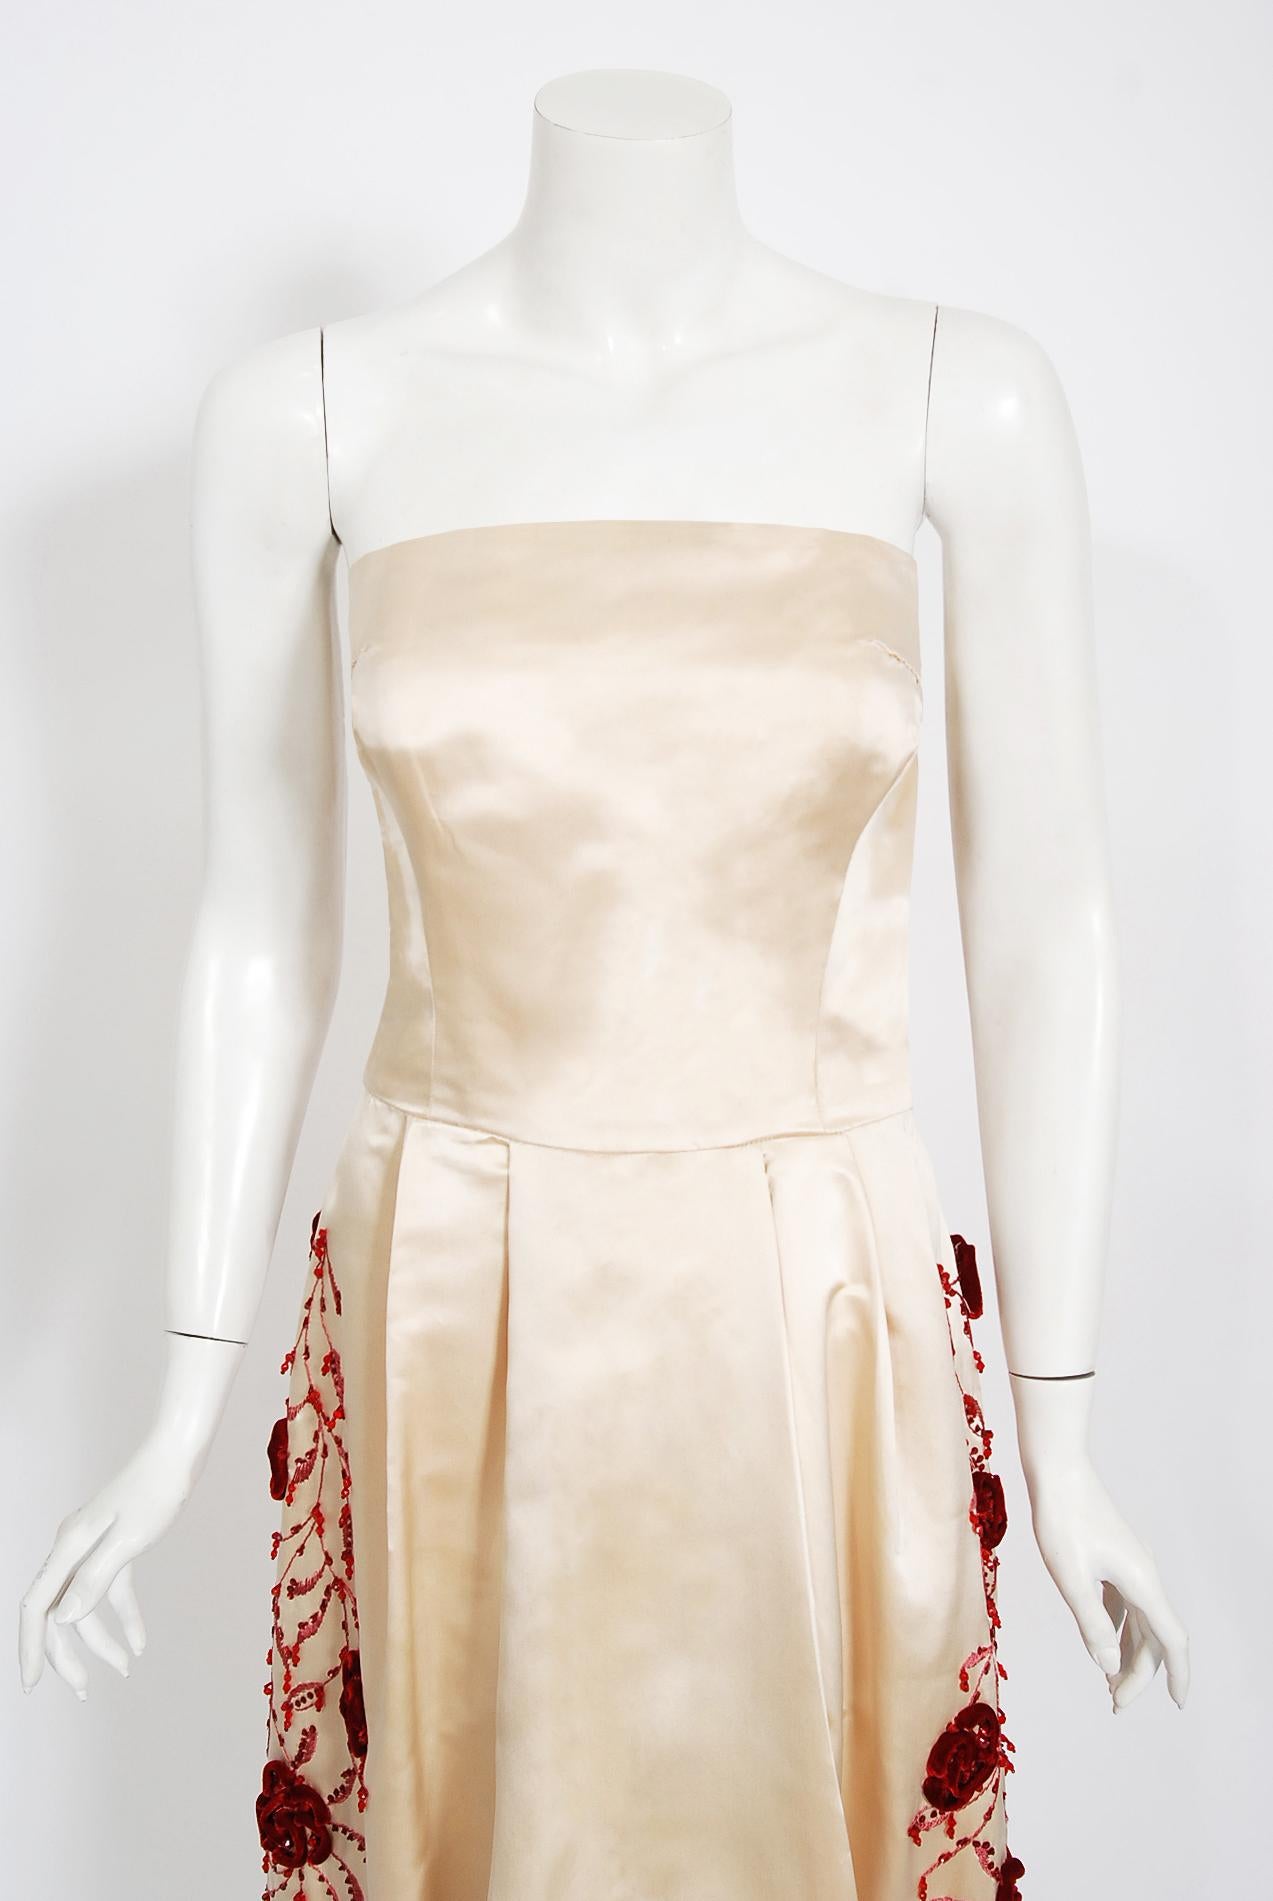 Gorgeous Harvey Berin designer silk-satin formal dress dating back to the early 1950's. Harvey Berin opened his business in 1921, and by the 1940's he was an important name in women's fashion. His designer, Karen Stark, adapted the latest styles